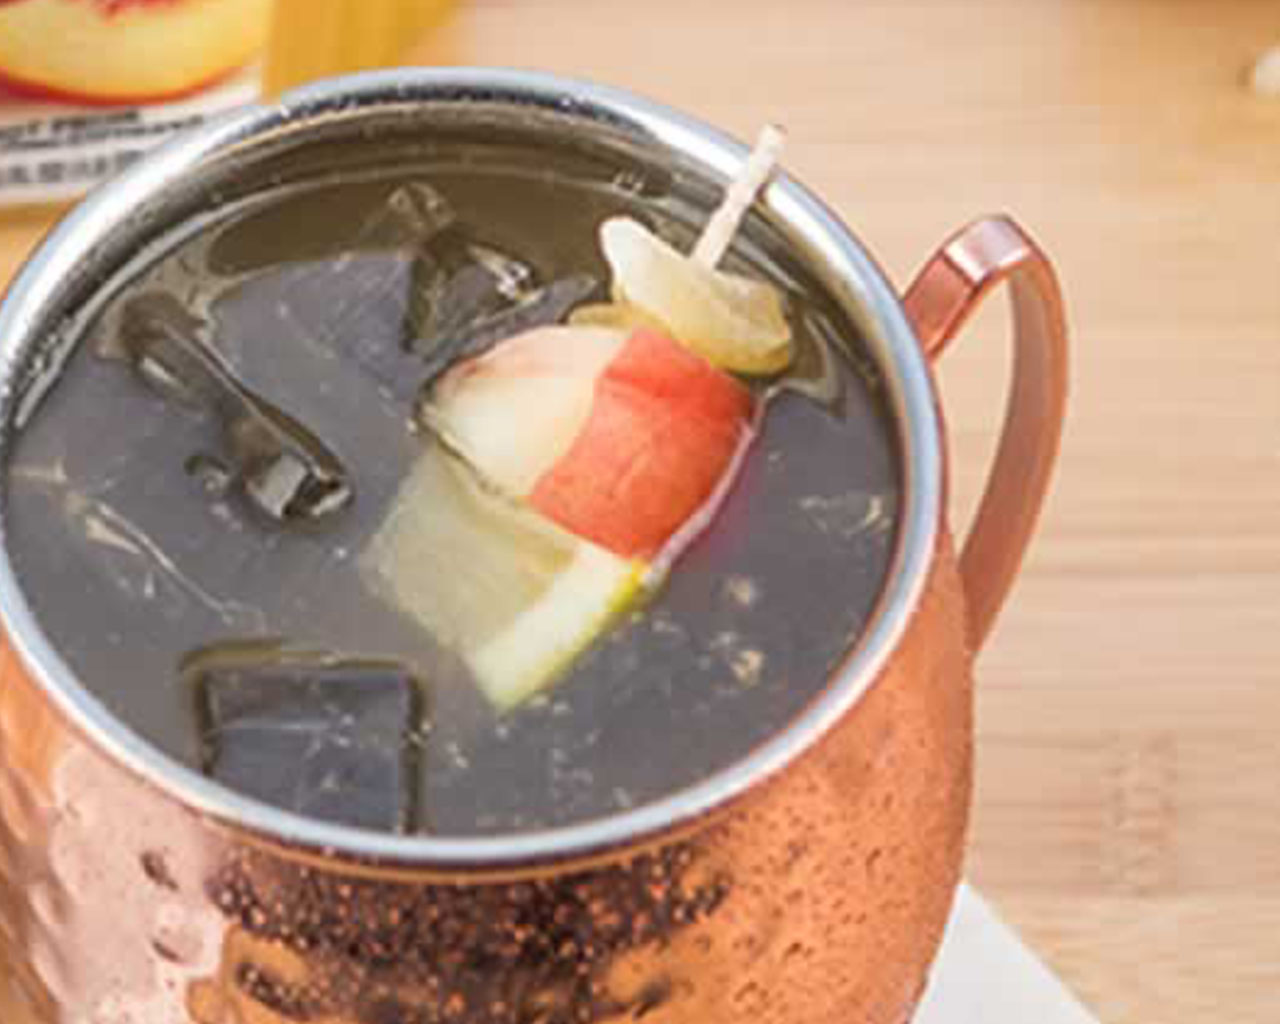 https://www.coca-cola.com/content/dam/onexp/us/en/brands/simply/recipes-and-mixology/juices-and-drinks/juice-and-drinks-lp/USA_simply_fiery_mule_campaign_card_left_desktop_1280x1024.jpg.jpg